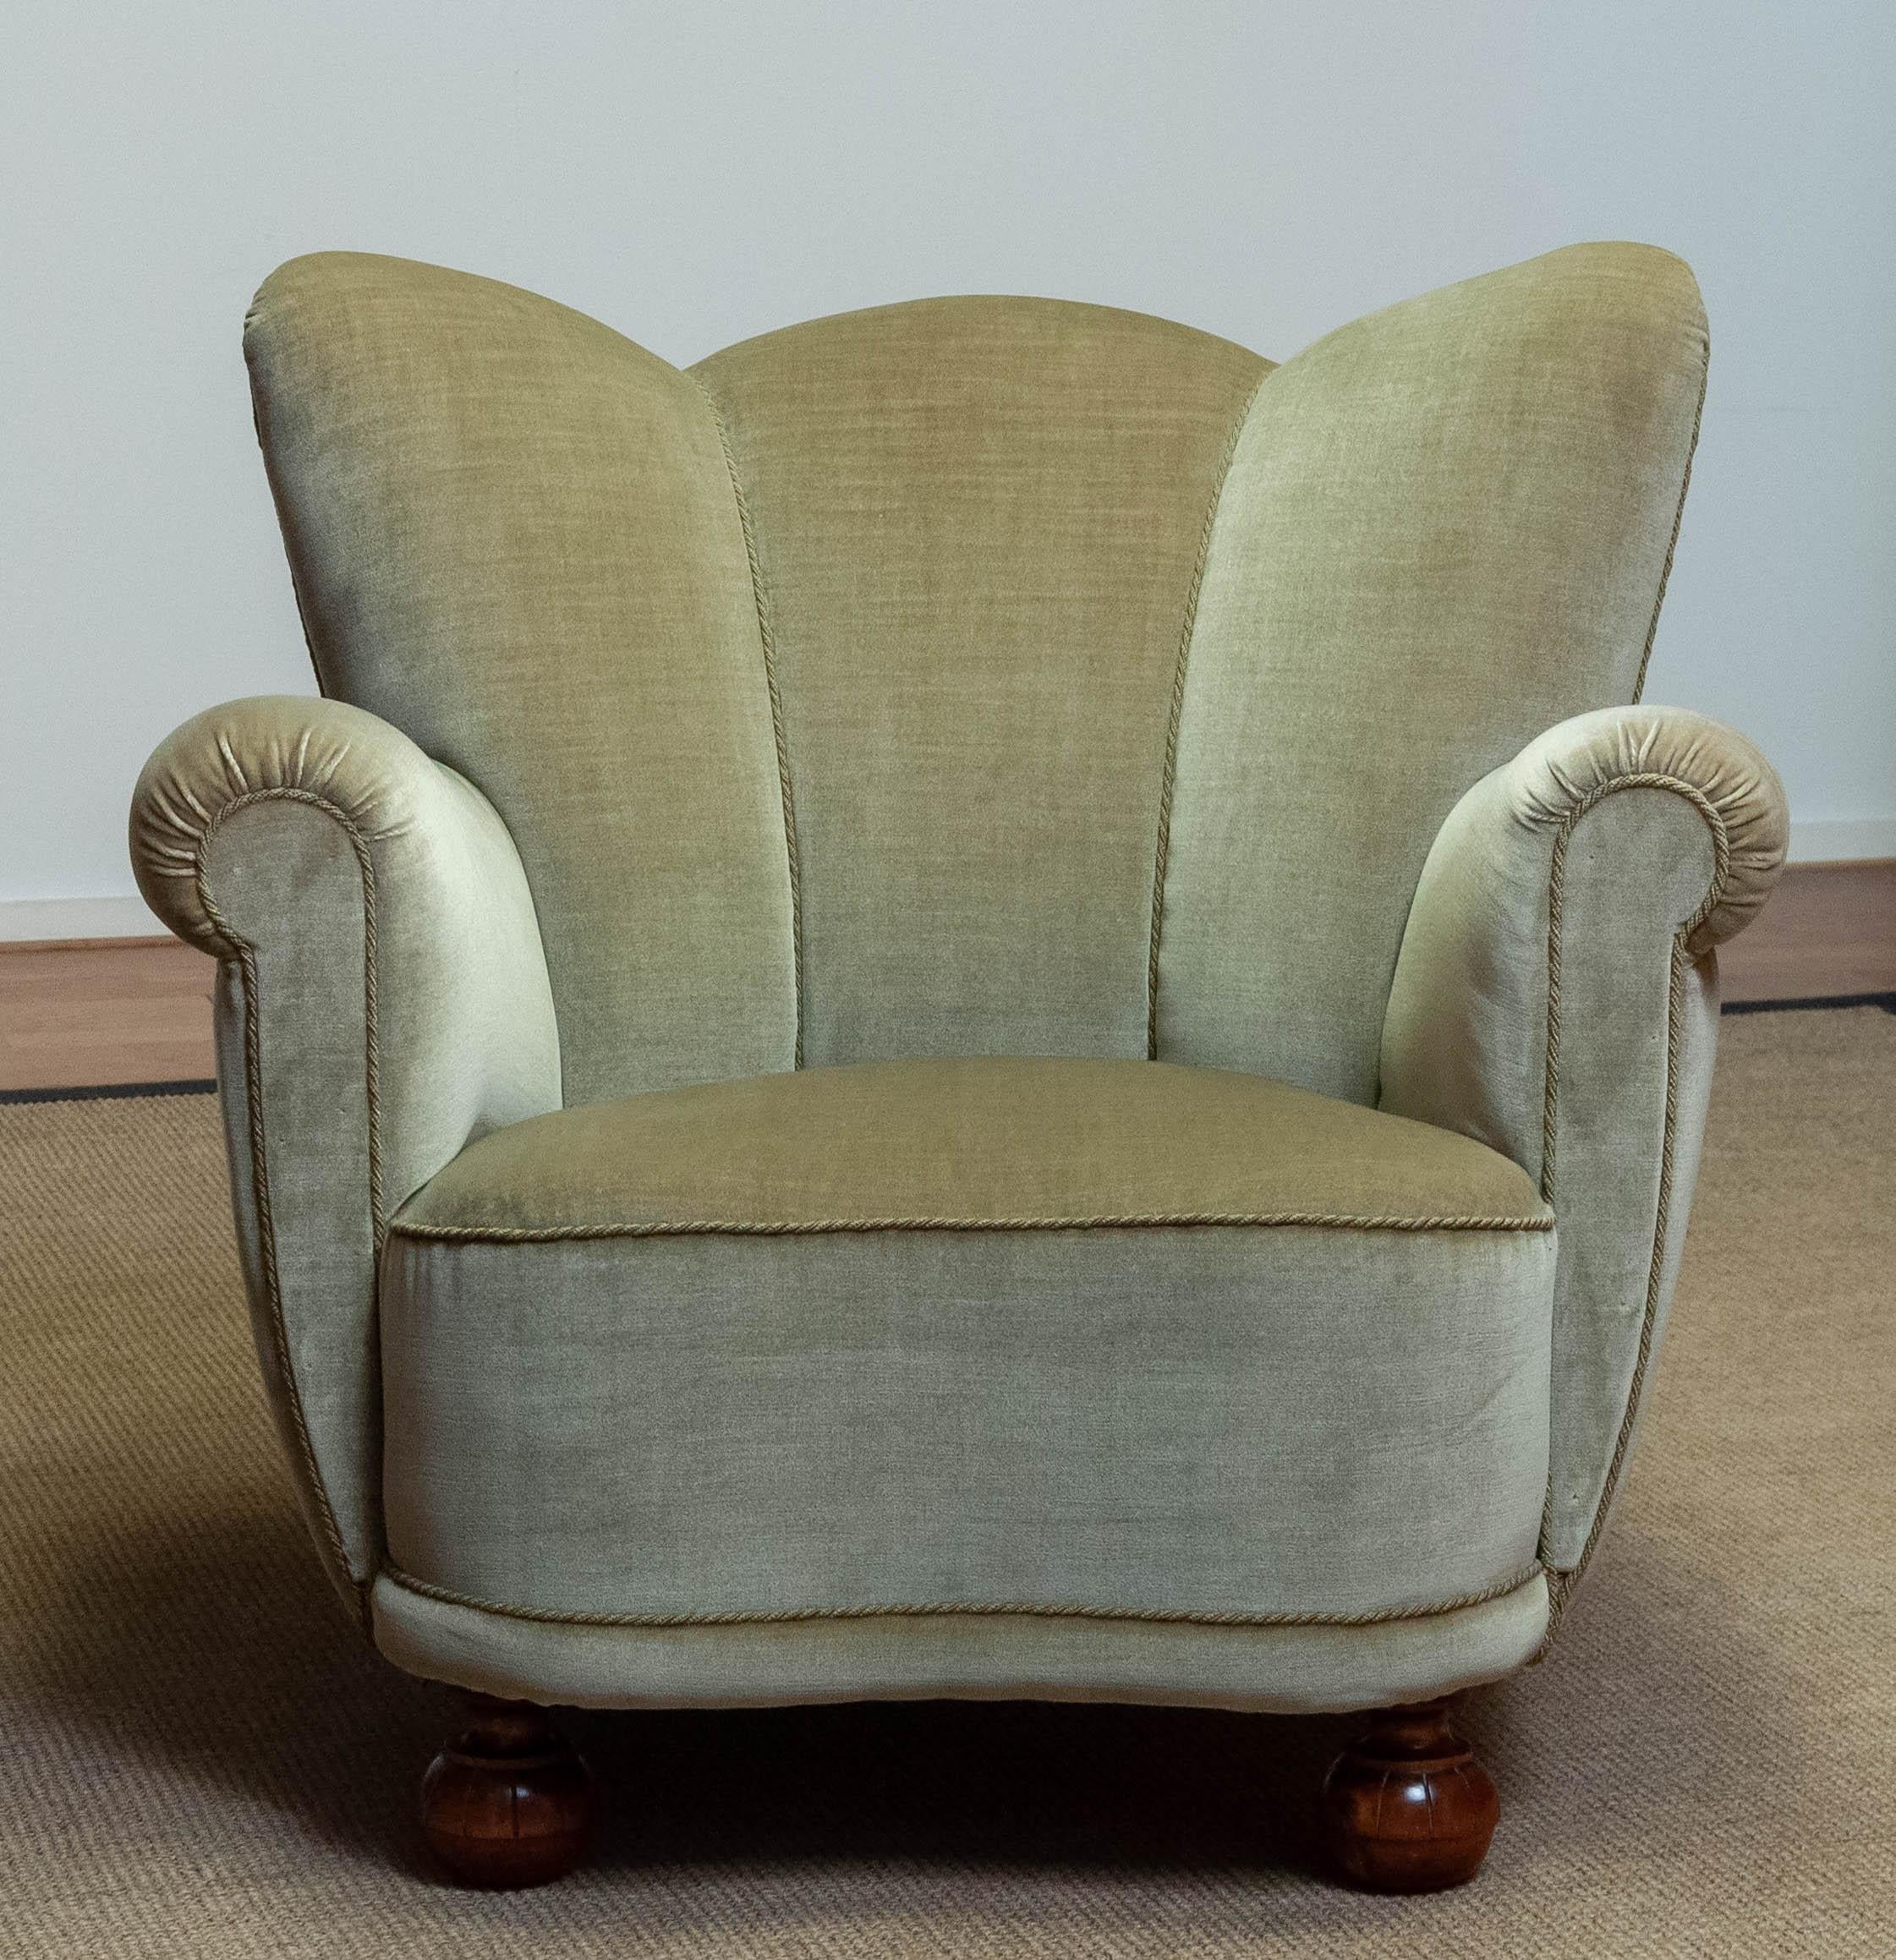 Stunning wingback chair upholstered in the original green velvet in the typical Fritz Hansen style on the 1940s. Hand-tied springs and webbing is replaced and therefor this chair sits and supports great.
Allover in good condition.